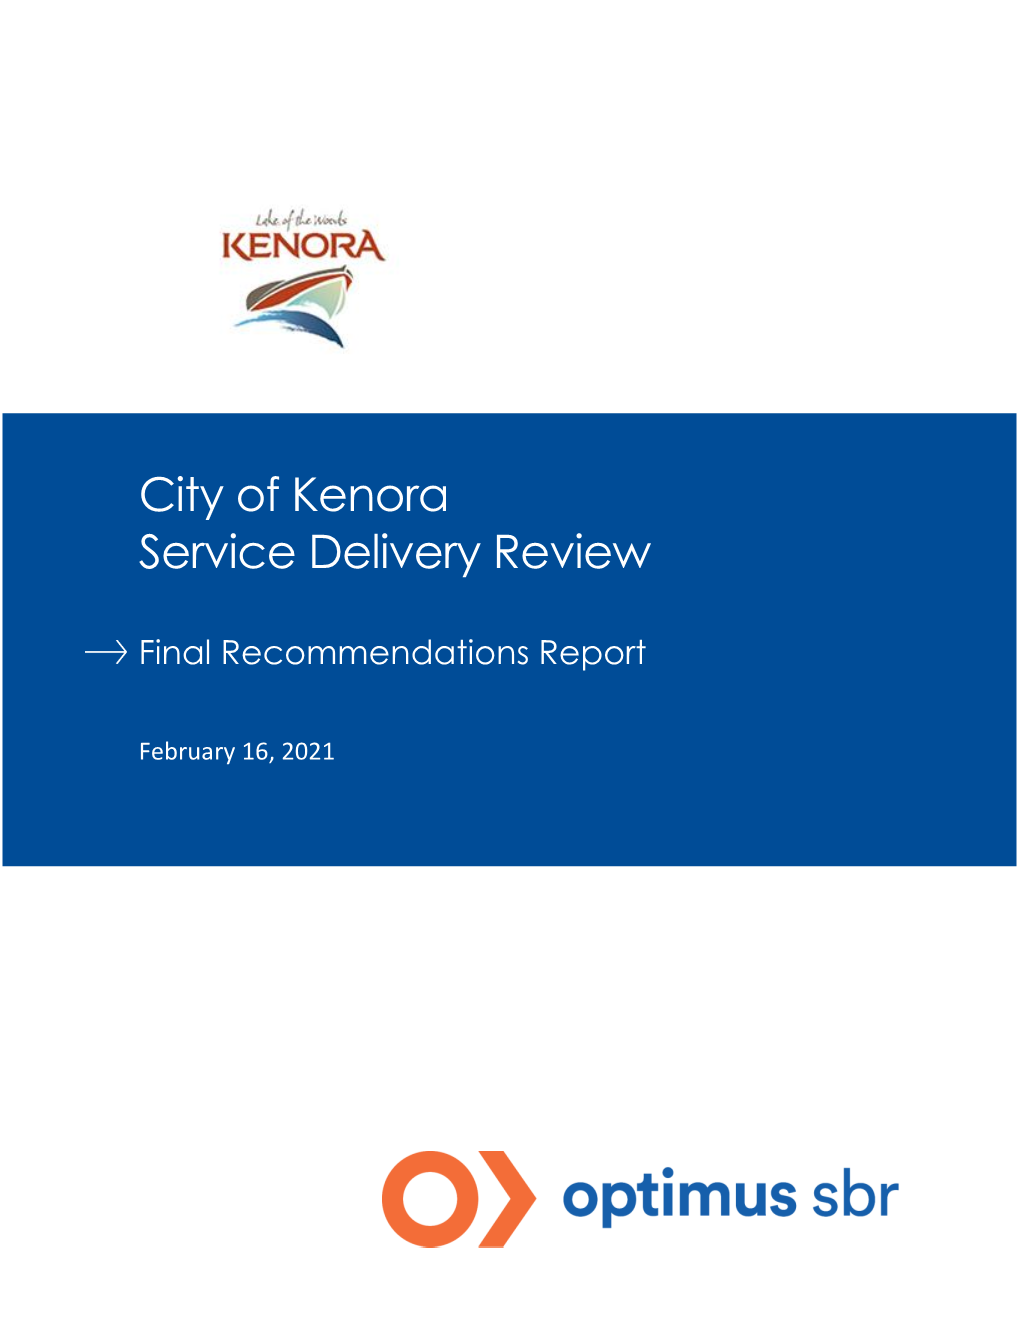 Service Delivery Review Report